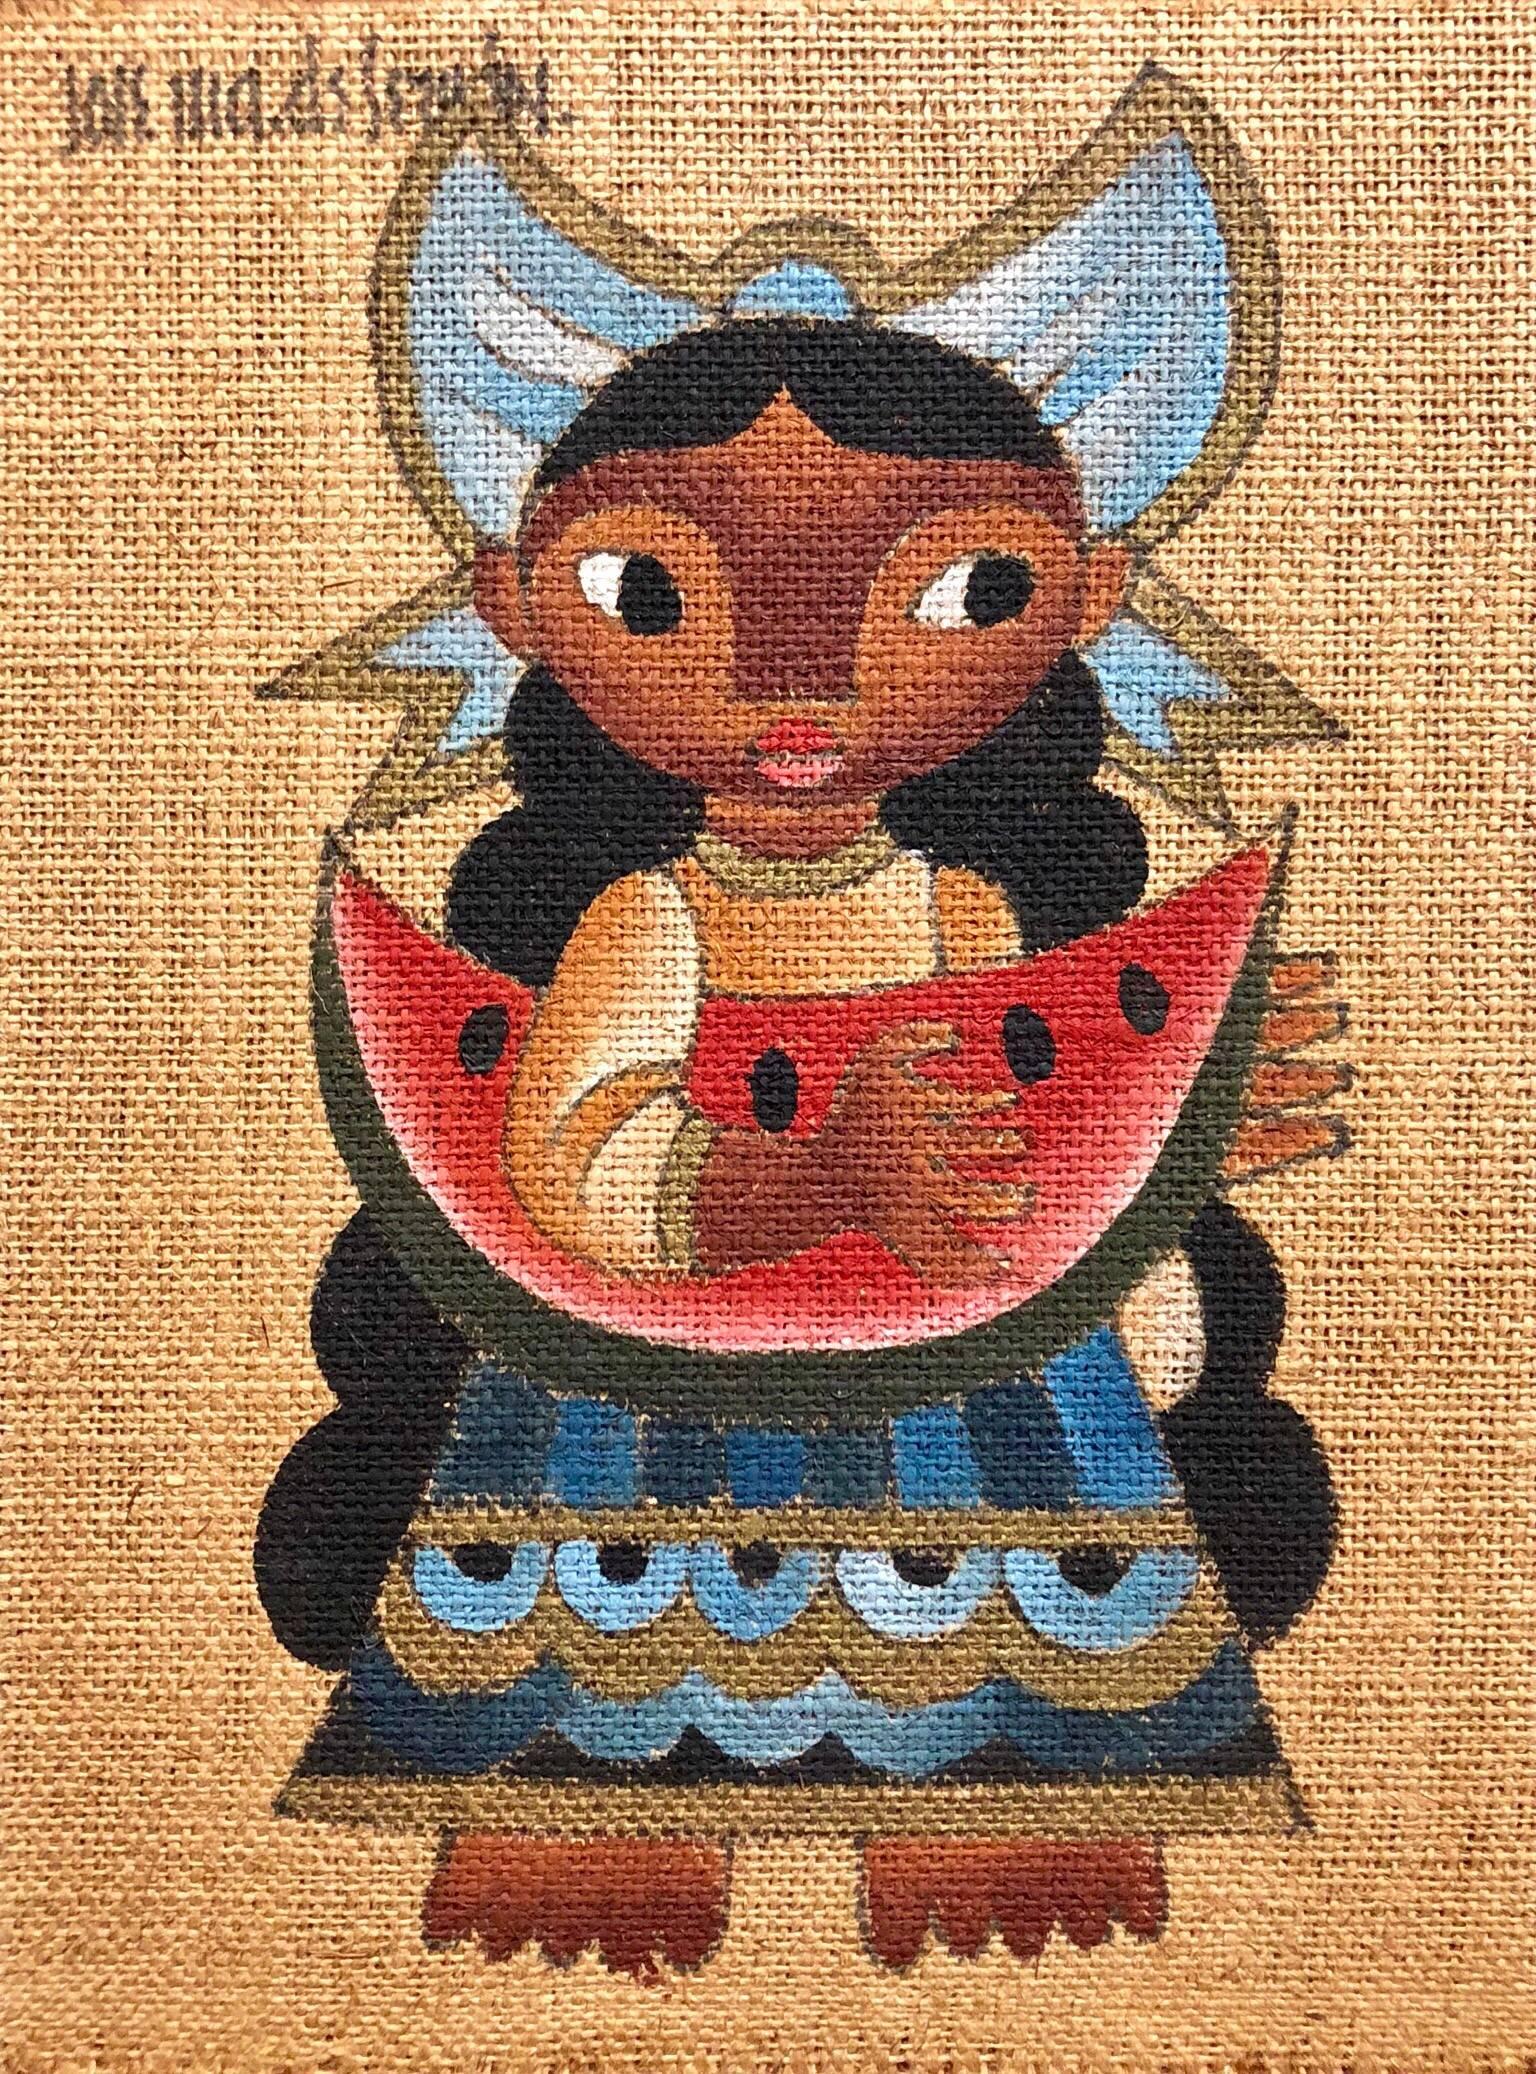 Jose Maria de Servin Figurative Painting - Folk Art Mexican Girl with Watermelon Oil Painting on Burlap